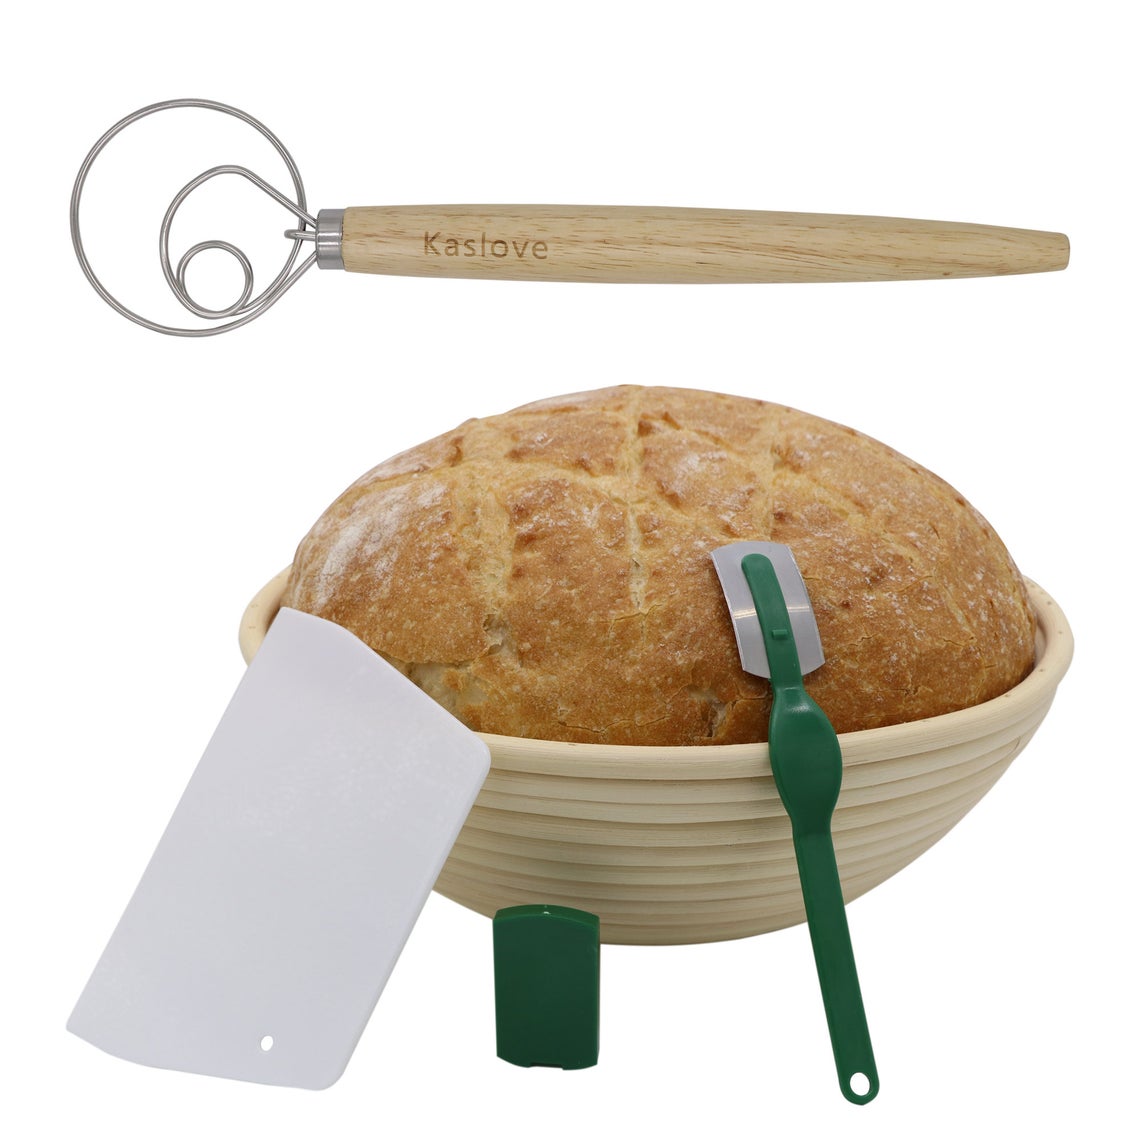 10 Pieces Oblong Oval Banneton Proofing Bread Basket,Rising Rattan Basket-Included Baking Bowl Dough+Dough Whisk+Scraper+Bread Lame+Blade+Cloth Liner French Style For Home Bakers 